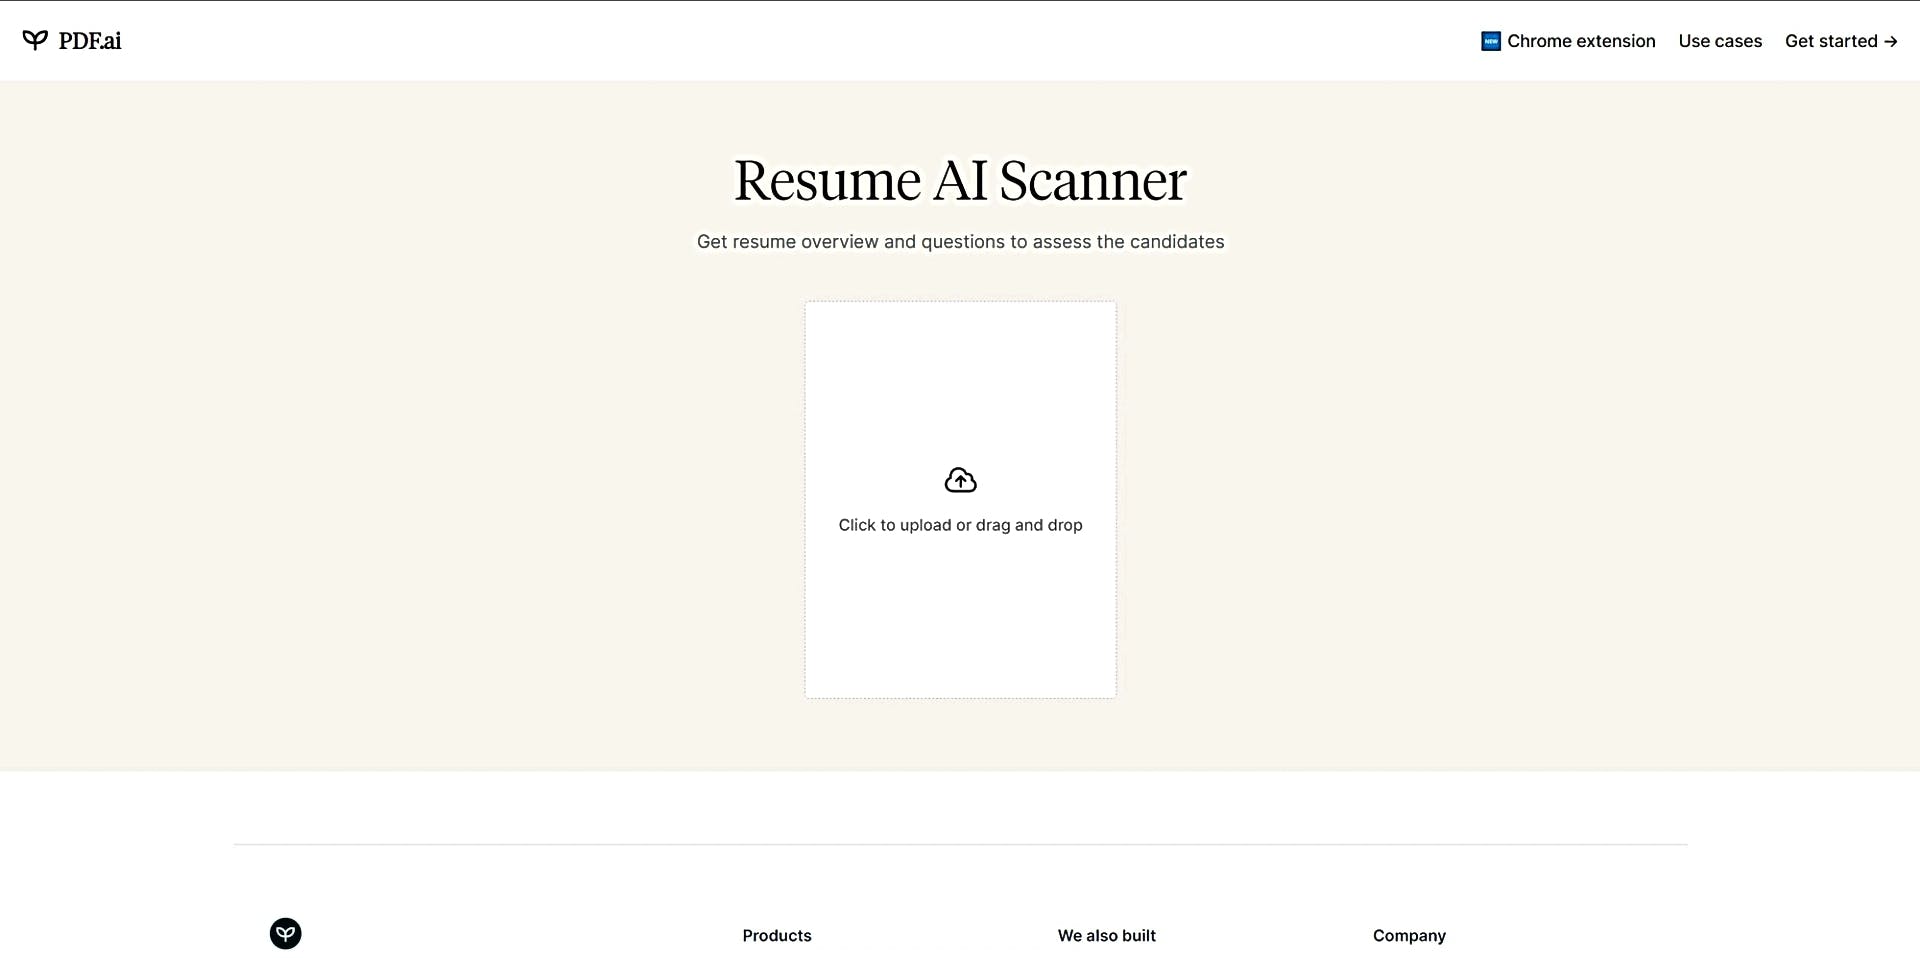 Resume AI Scanner featured